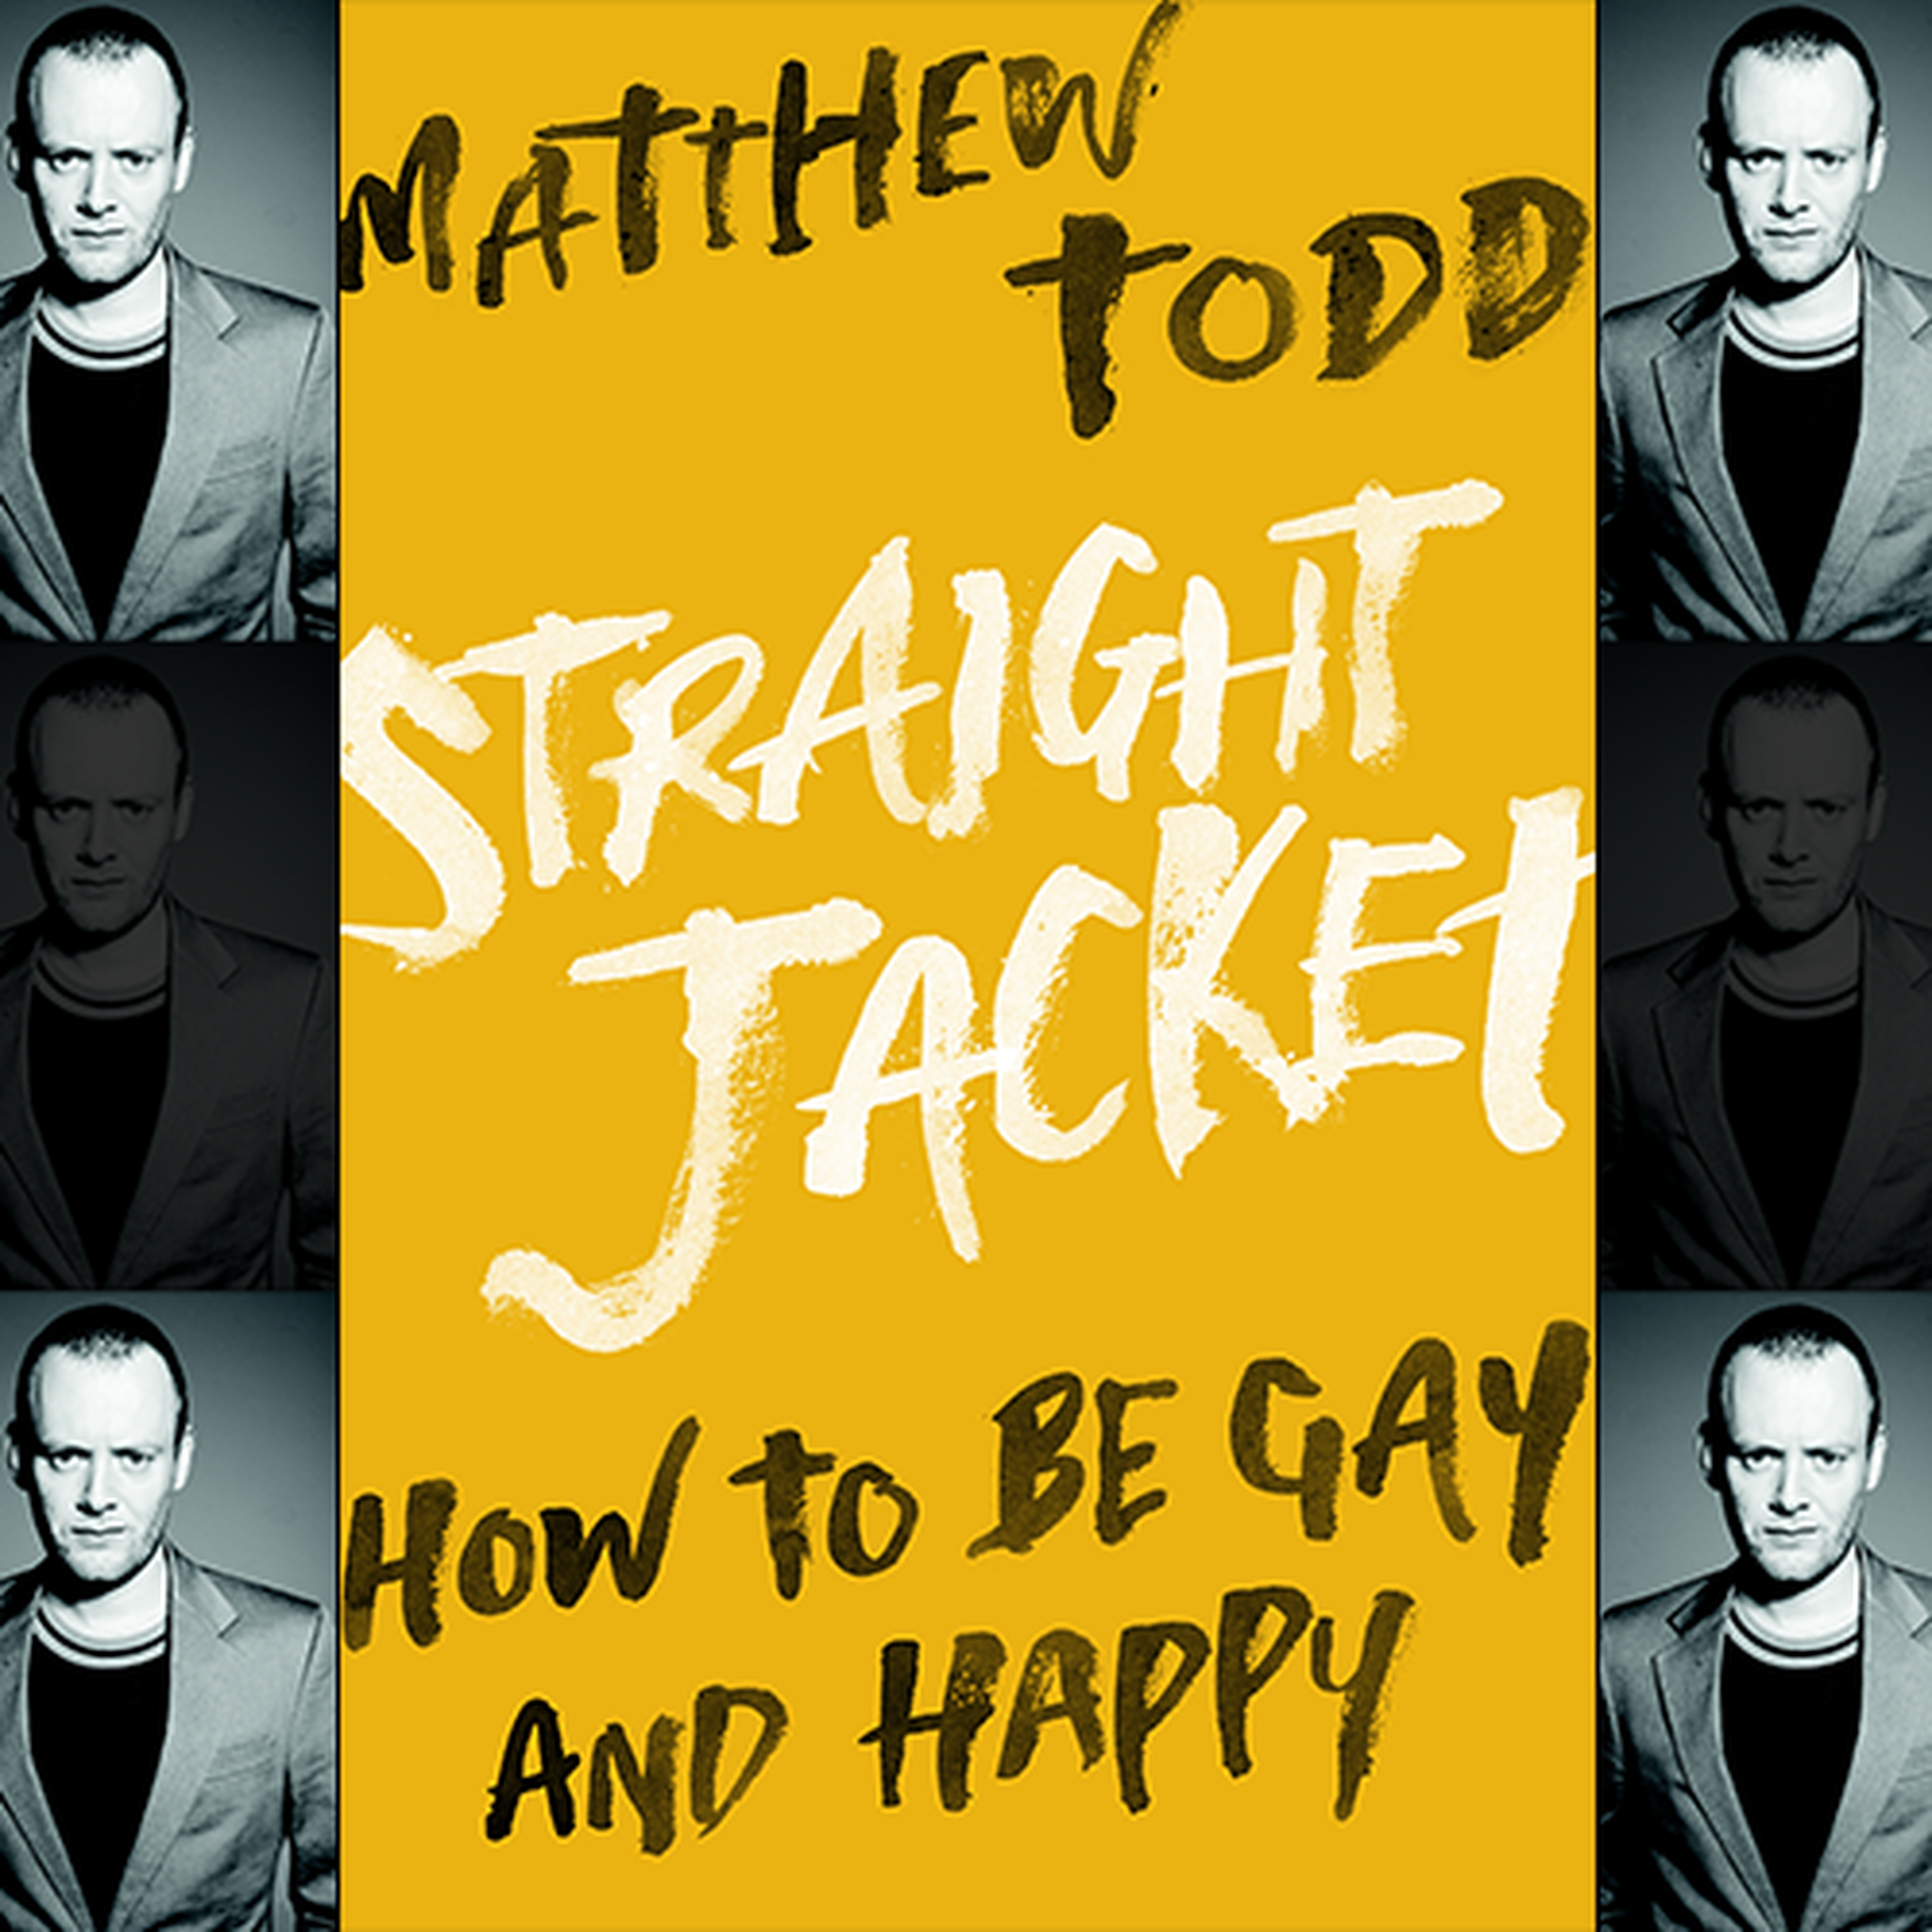 How to be gay and happy - breaking the ’Straight Jacket’ - Matthew Todd Former Attitude Magazine Editor